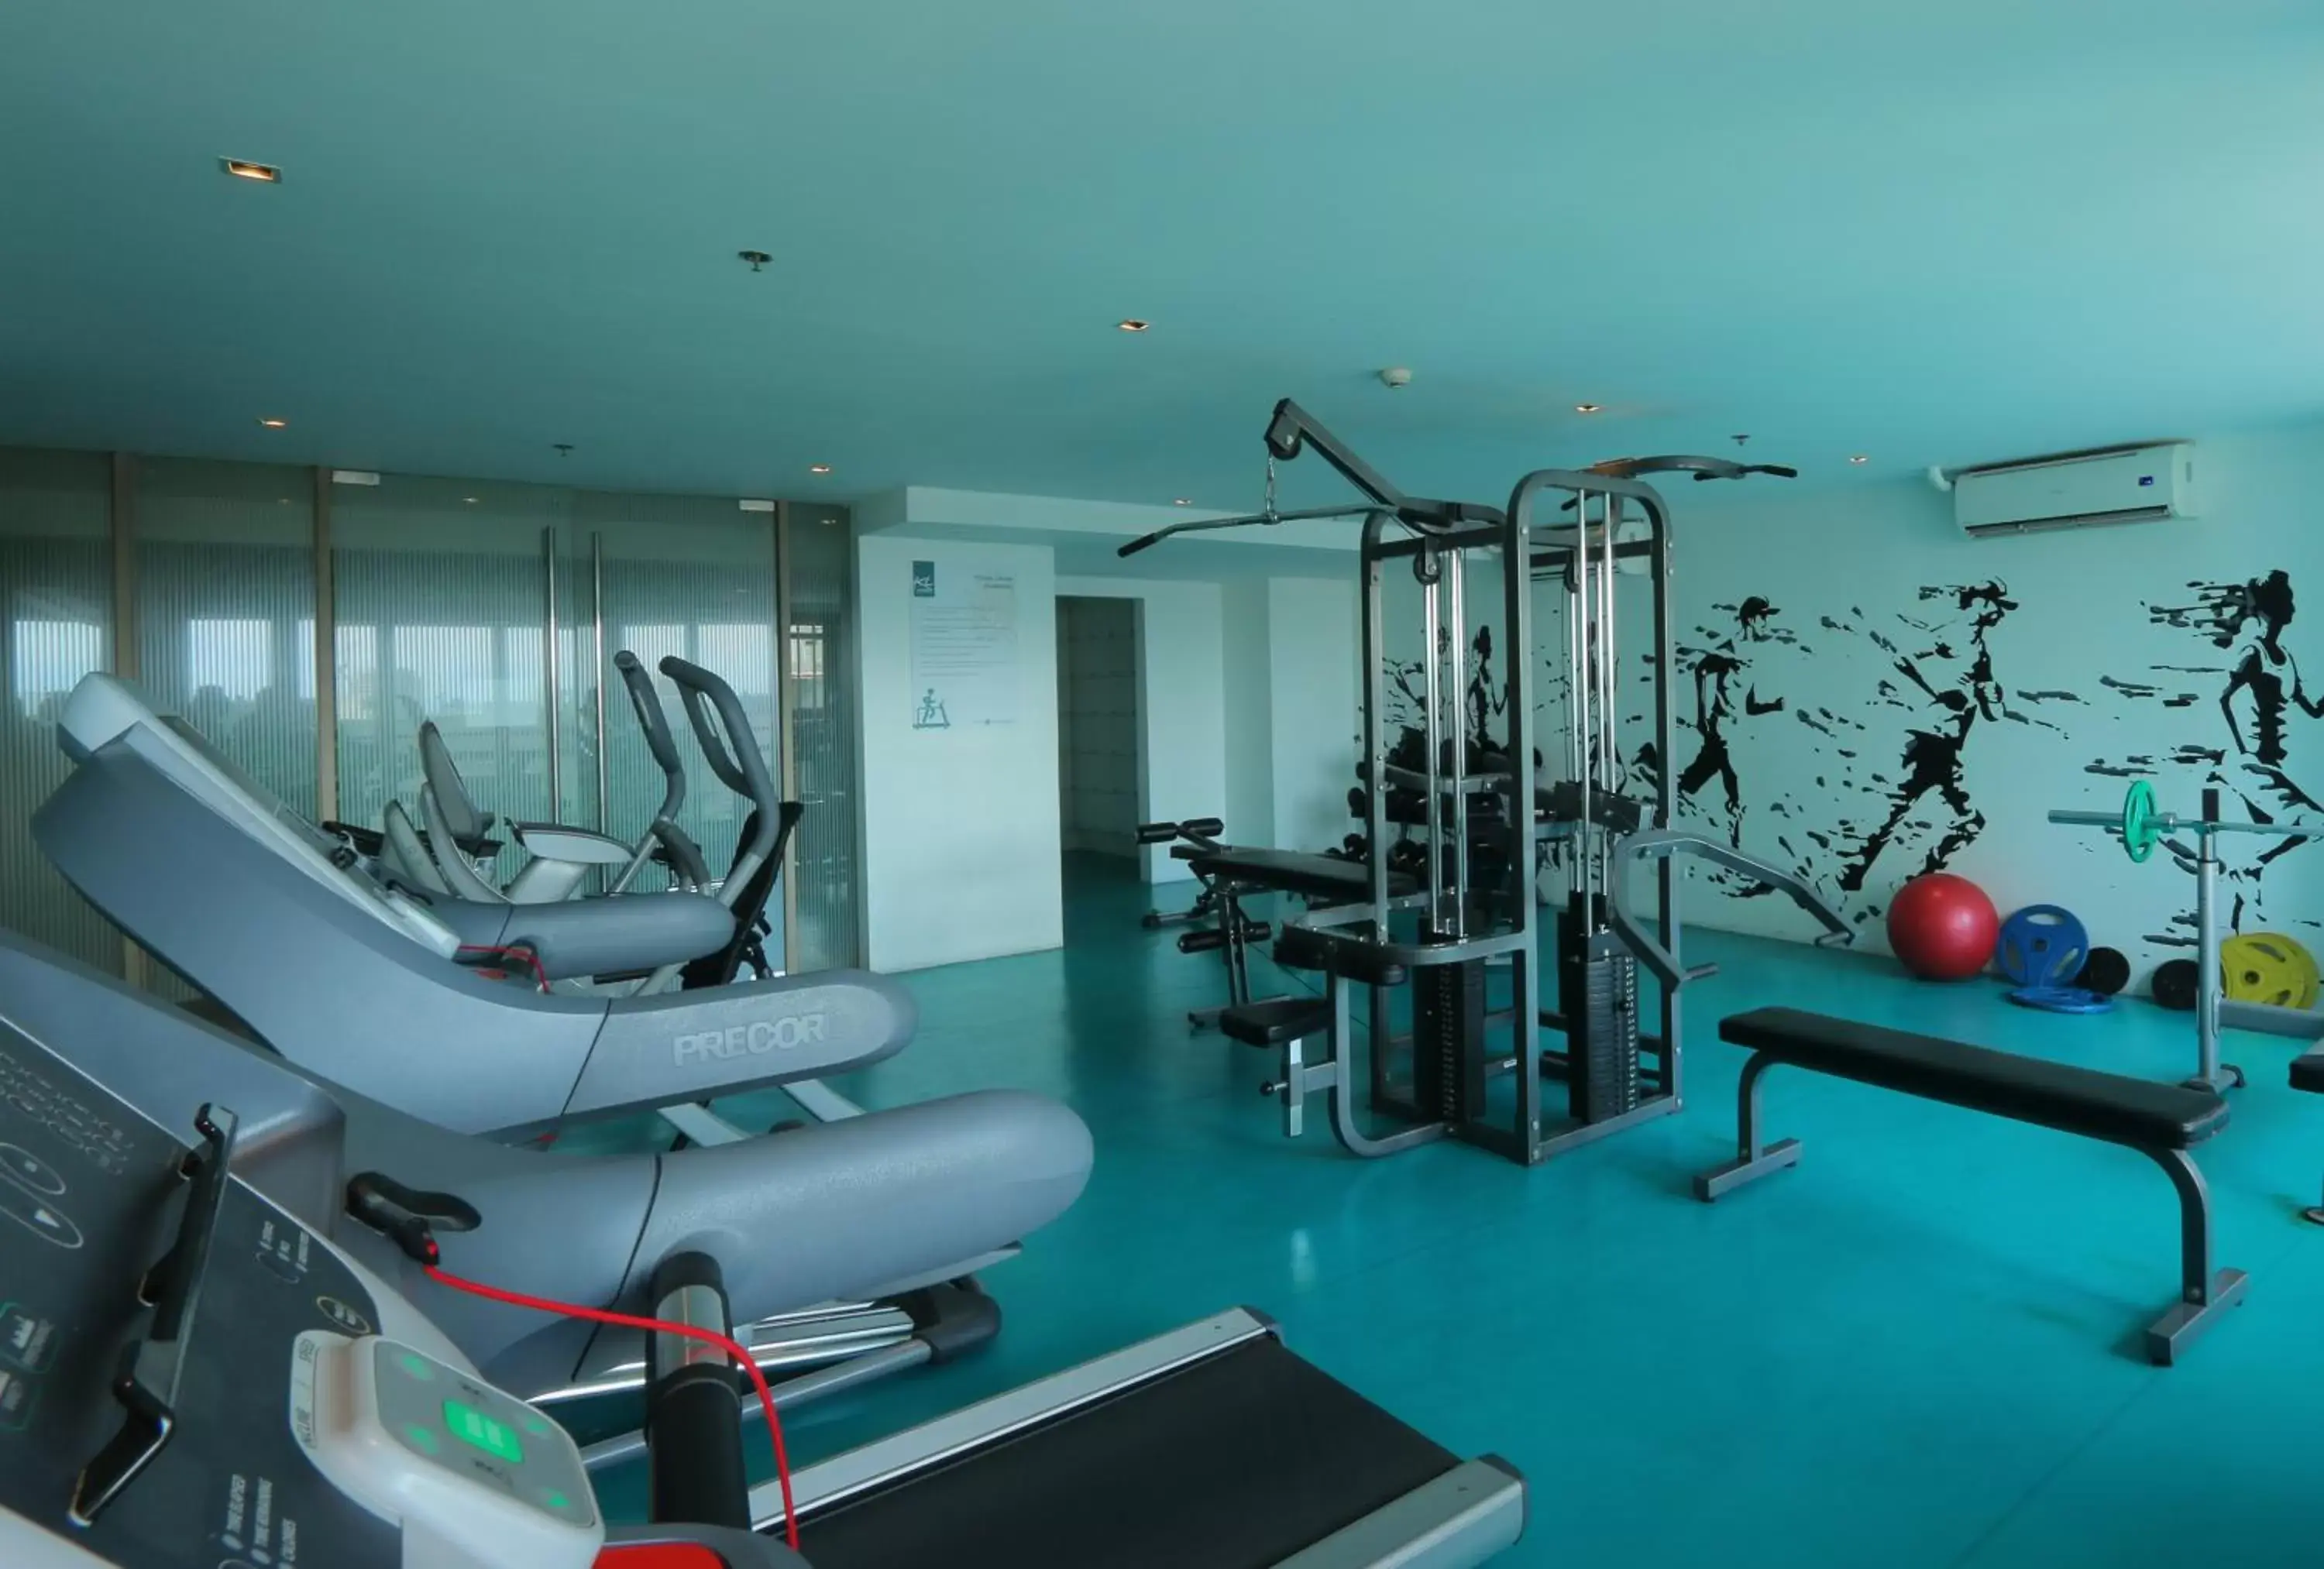 Fitness centre/facilities, Fitness Center/Facilities in KL Serviced Residences Managed by HII